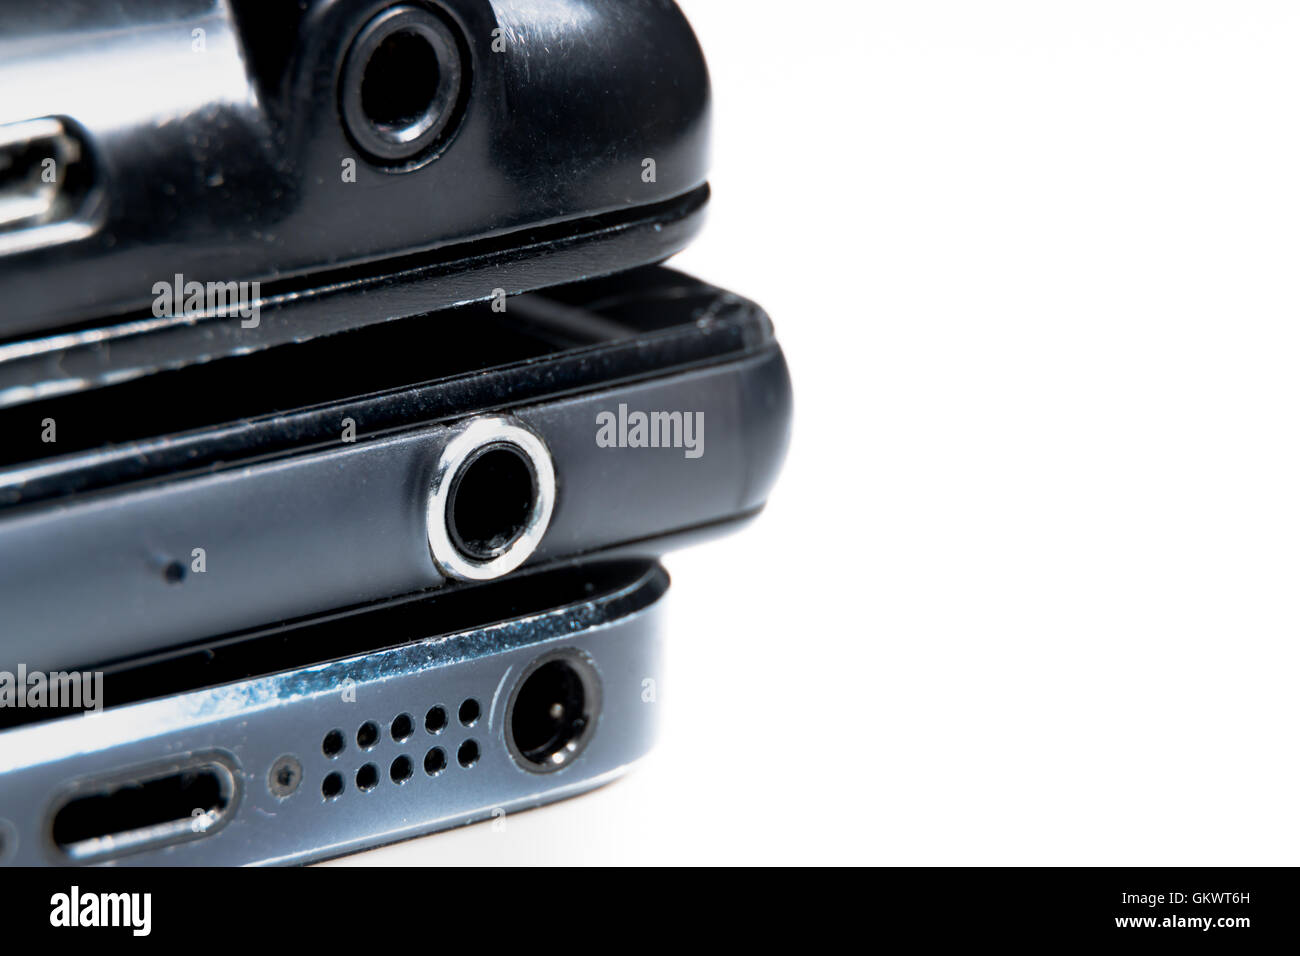 Close up of three 3.5mm headphone jacks on an android smartphone, iphone and portable radio. Stock Photo